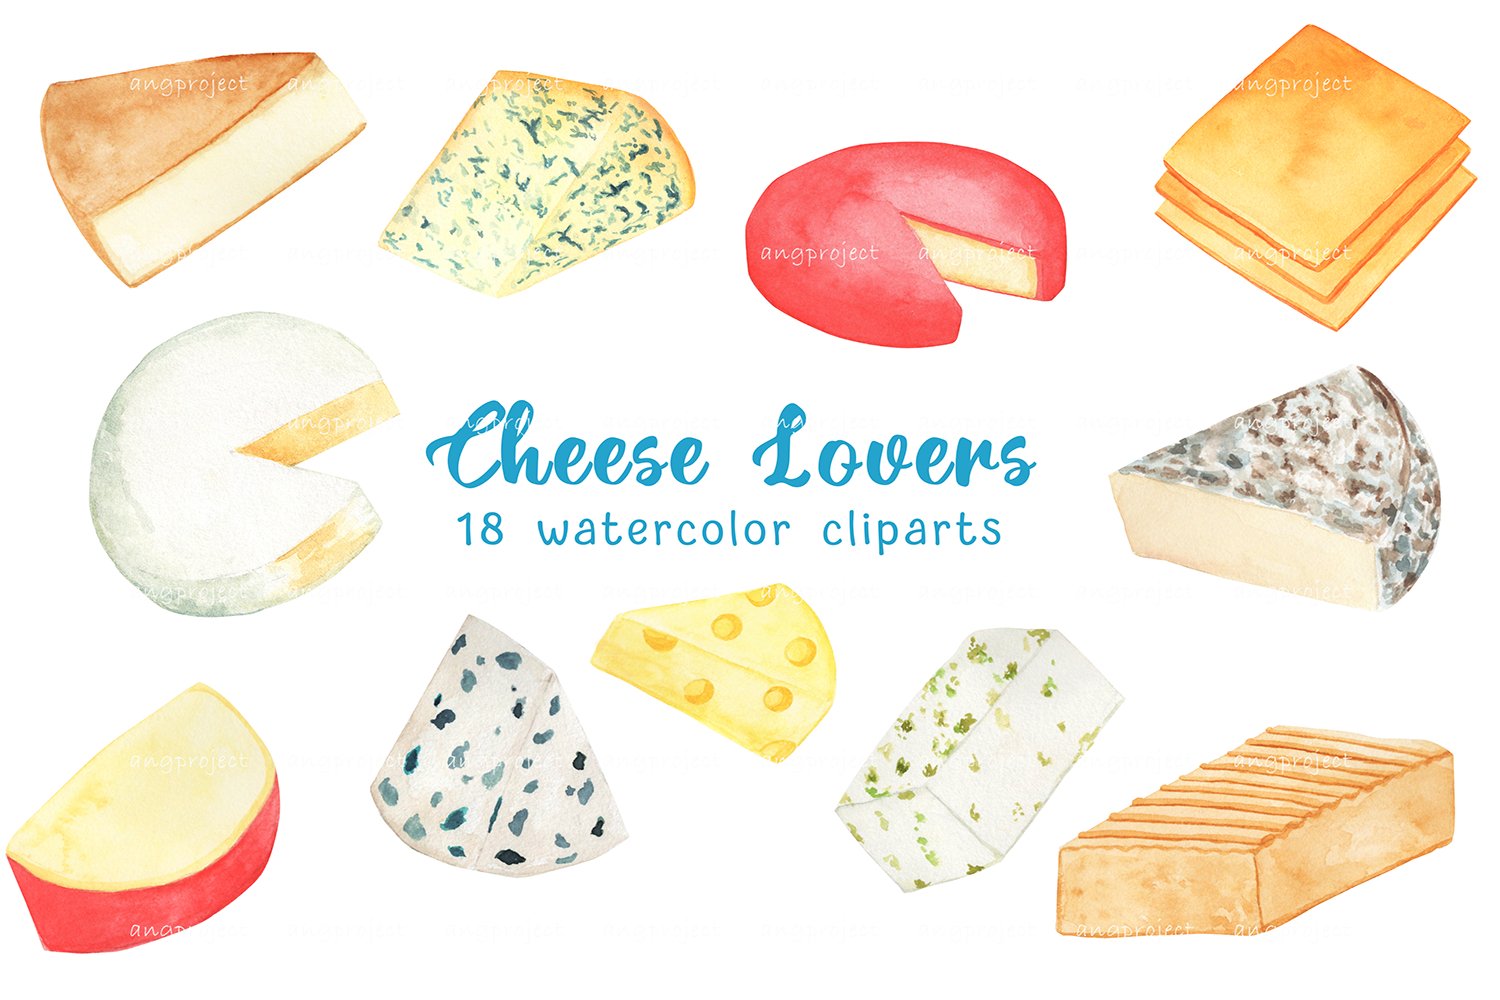 Set of colorful watercolor images of gourmet cheeses.